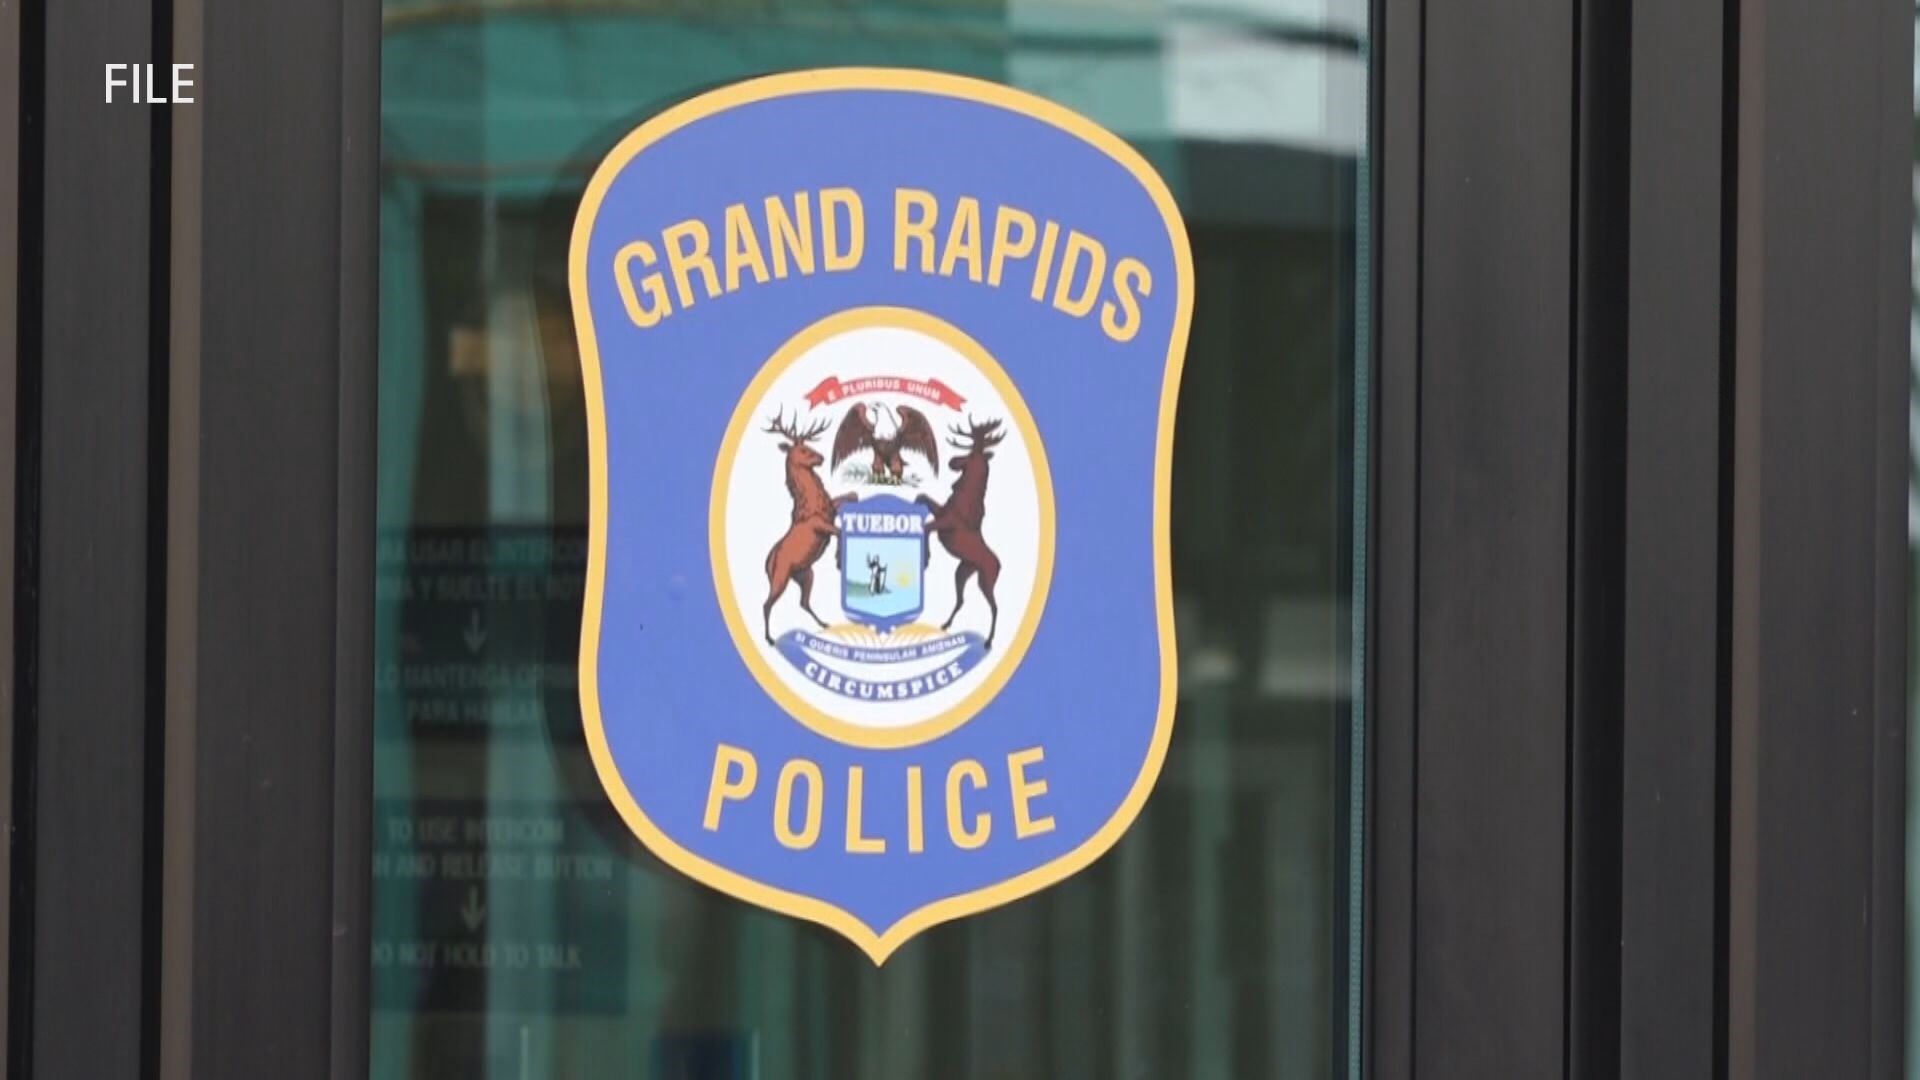 A collective bargaining agreement was approved by the city's Committee of the Whole. Final approval Tuesday evening would be a financial boost for GRPD officers.